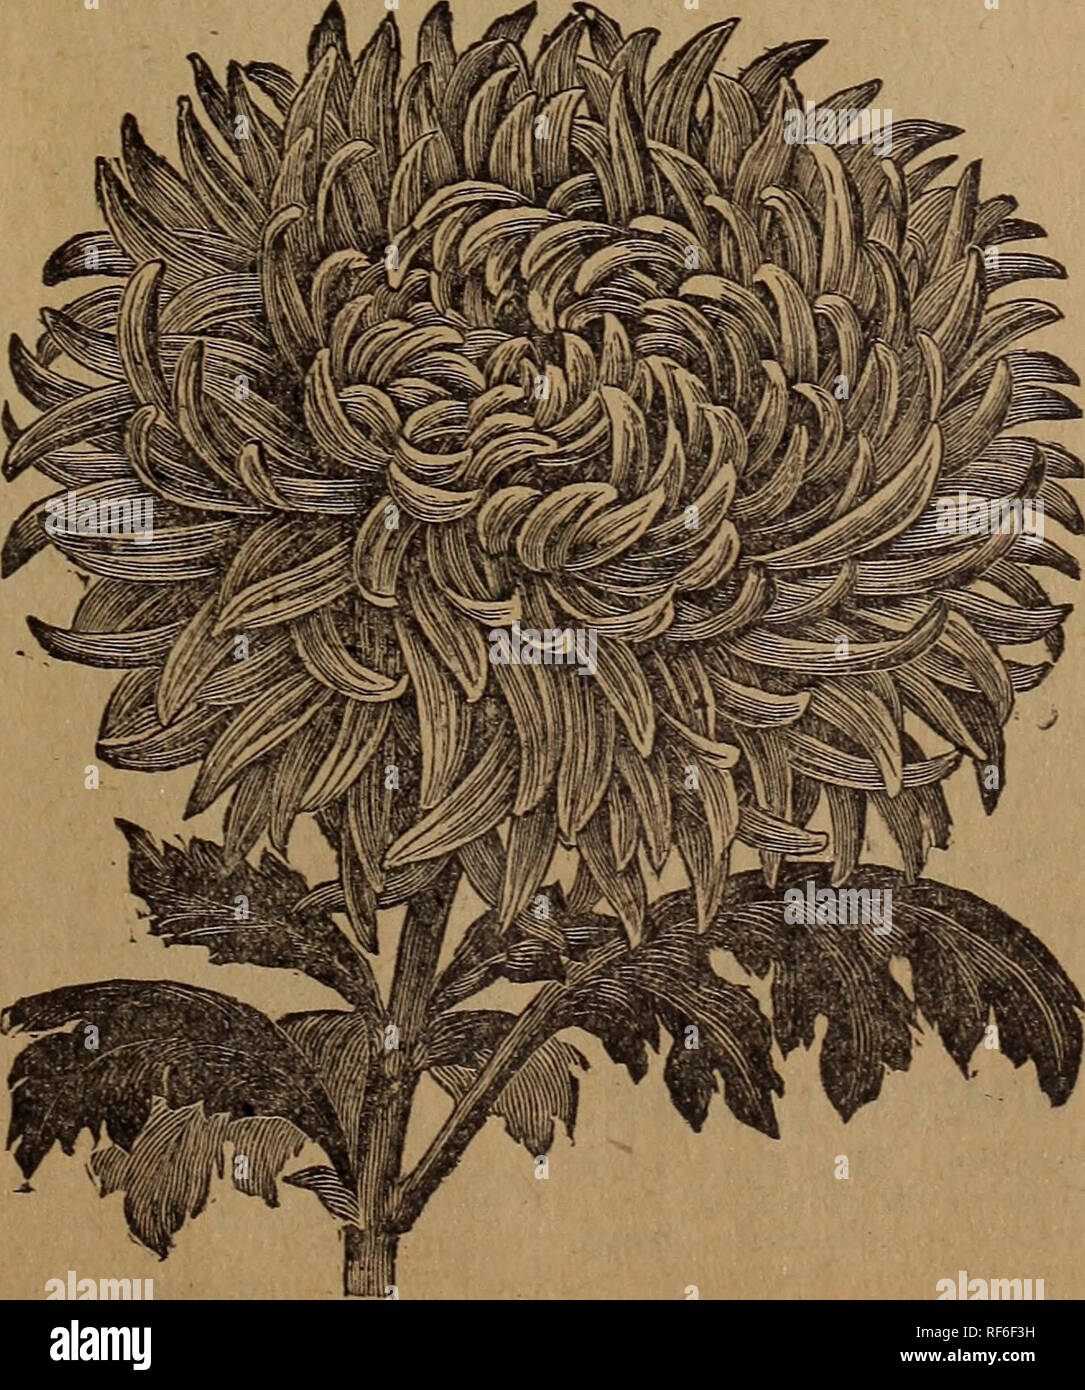 . Floral treasures : 1901. Nursery stock Ohio Catalogs; Roses Catalogs; Flowers Catalogs; Bulbs (Plants) Catalogs. Mrs. John Wanna maker. — White and pink, nicely blended. Minerva.—Immense vellow, fine form. Mrs. W. K. Vanderbilt.—A large flower of purest white. Mrs. E. G. Hill.—Delicate lavender pink, grand. Mermaid.—Very delicate, bright pink. Mistletoe.—Deep silver, flushed crimson. Murillo.—Deep velvety crimson. Mrs. Hicks Arnold.—Deep old gold, rich. Mrs. C. H. Wheeler.—Bright orange, lined deep red. Mrs. Iiangtry.—Snow white, ribbon petals. Mrs. C. E. Coleman.—Red and gold, tipped rose.  Stock Photo